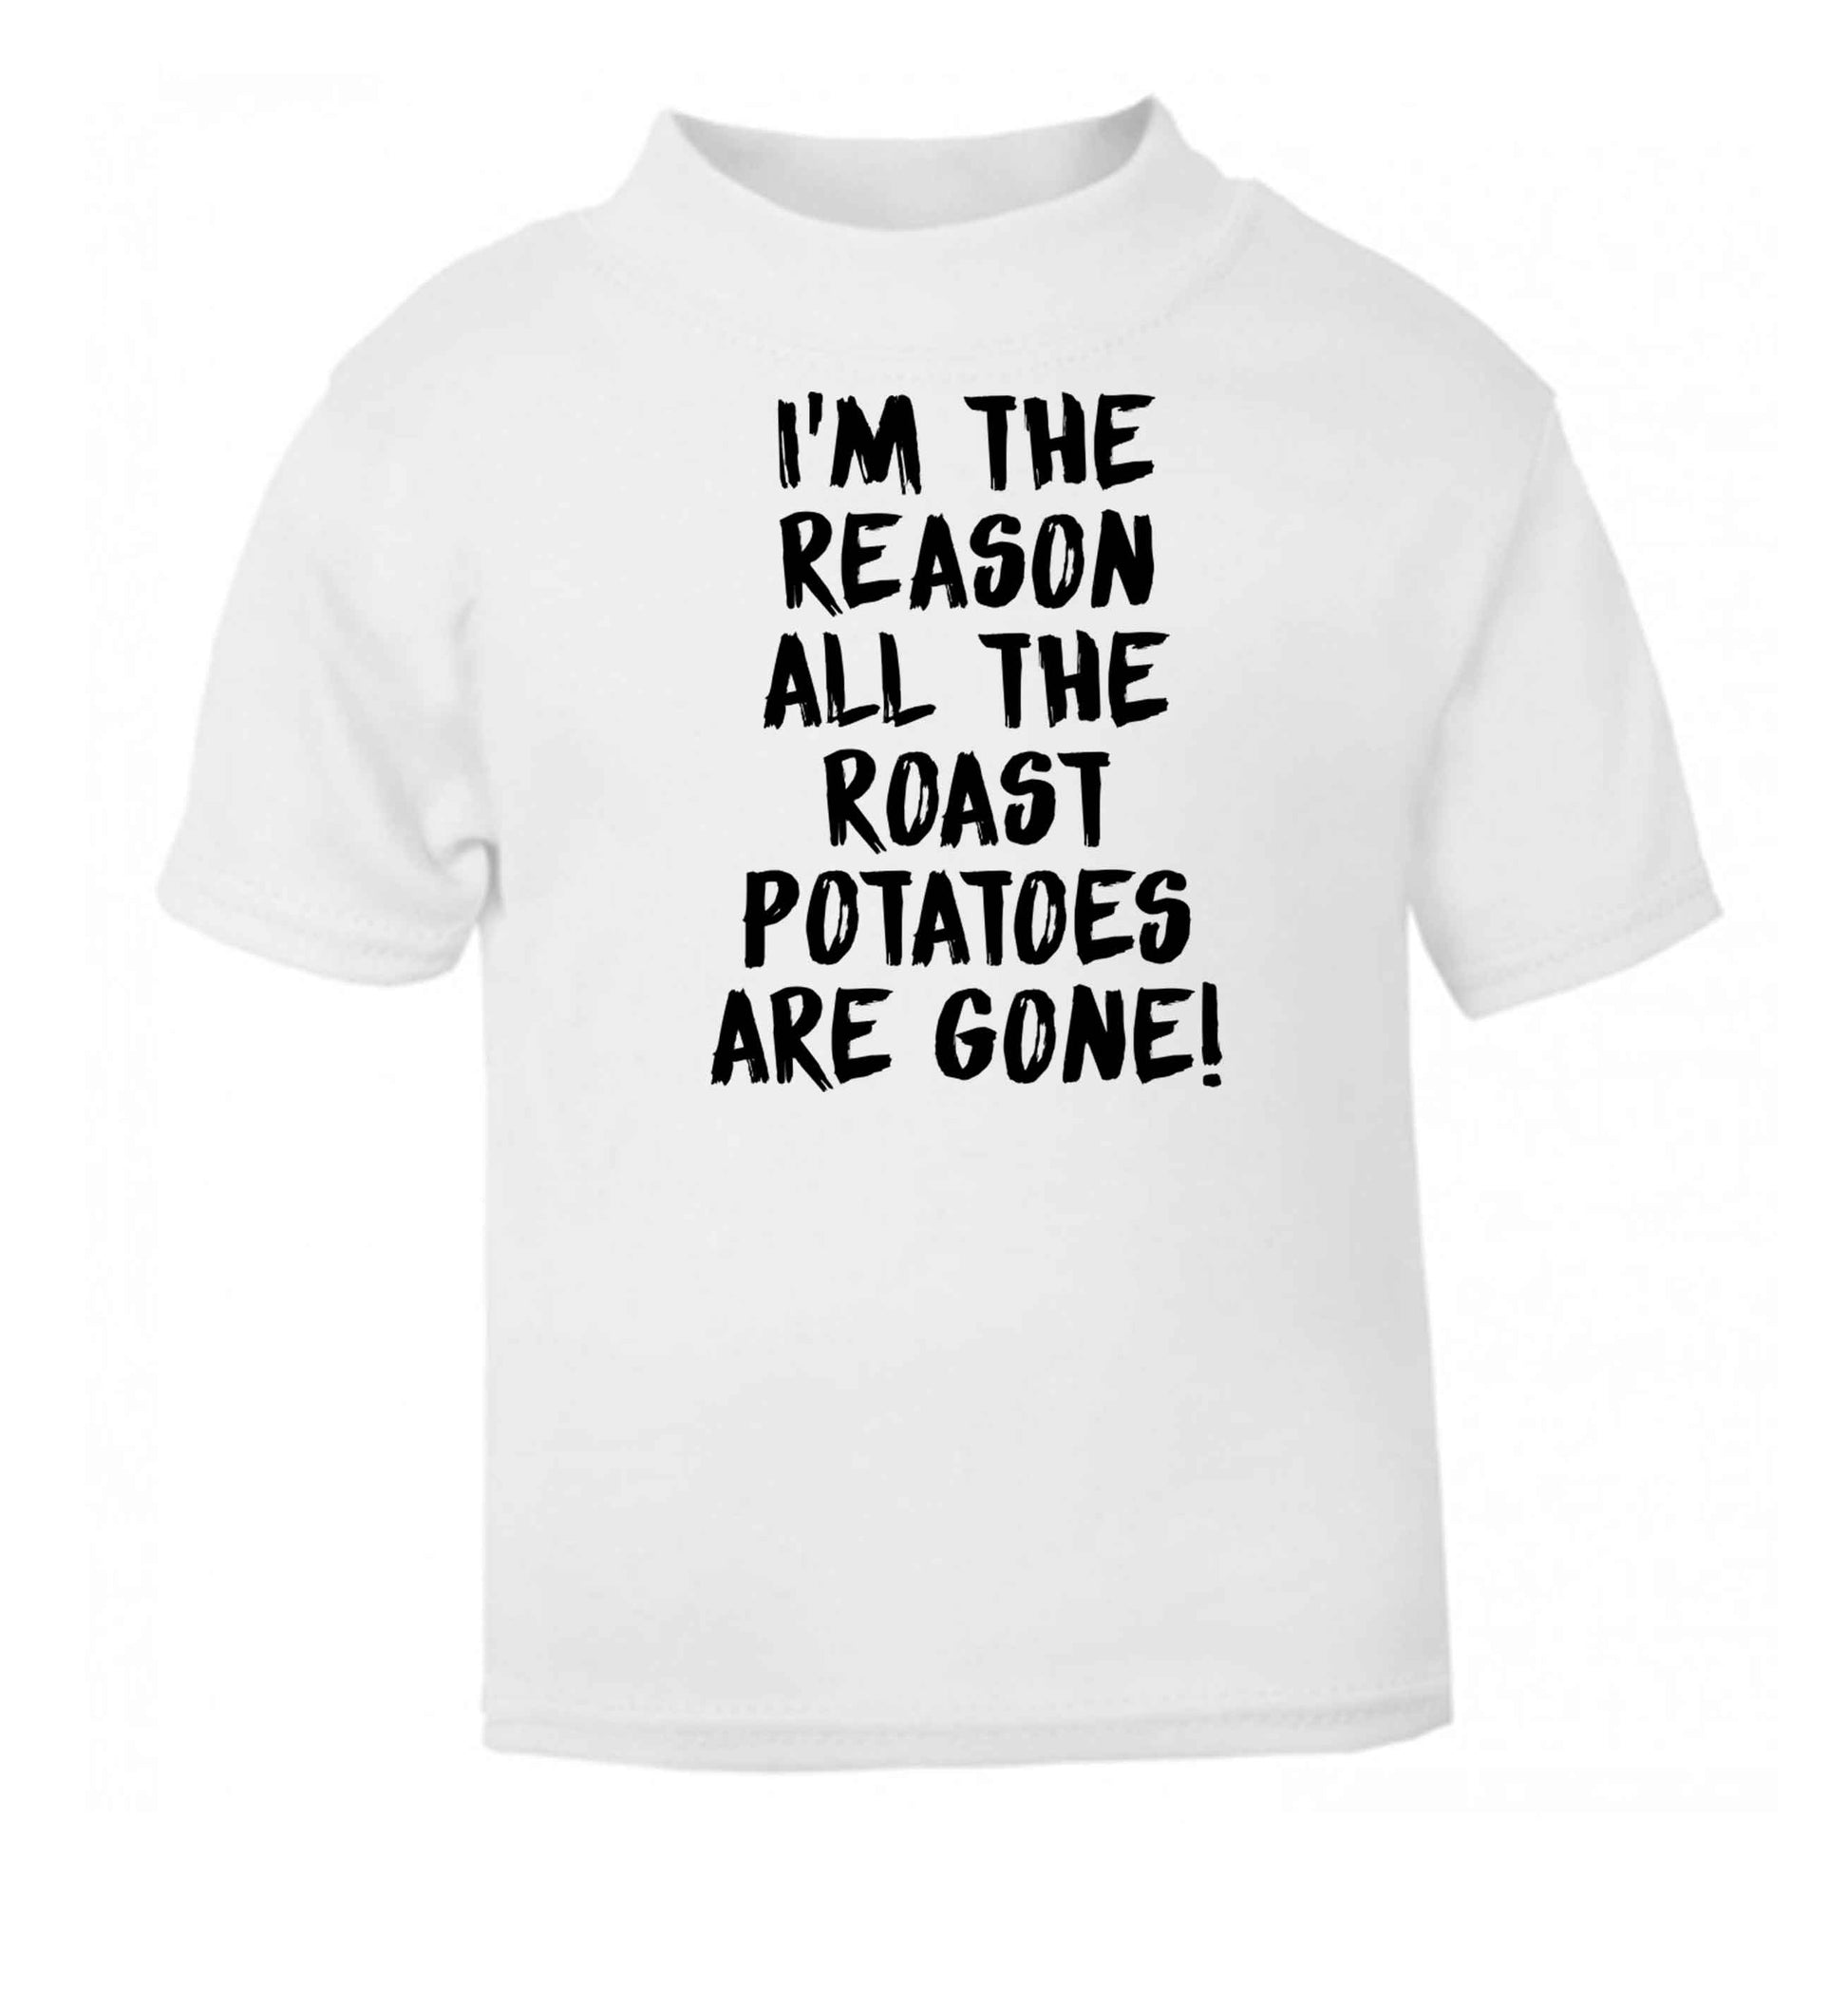 I'm the reason all the roast potatoes are gone white baby toddler Tshirt 2 Years